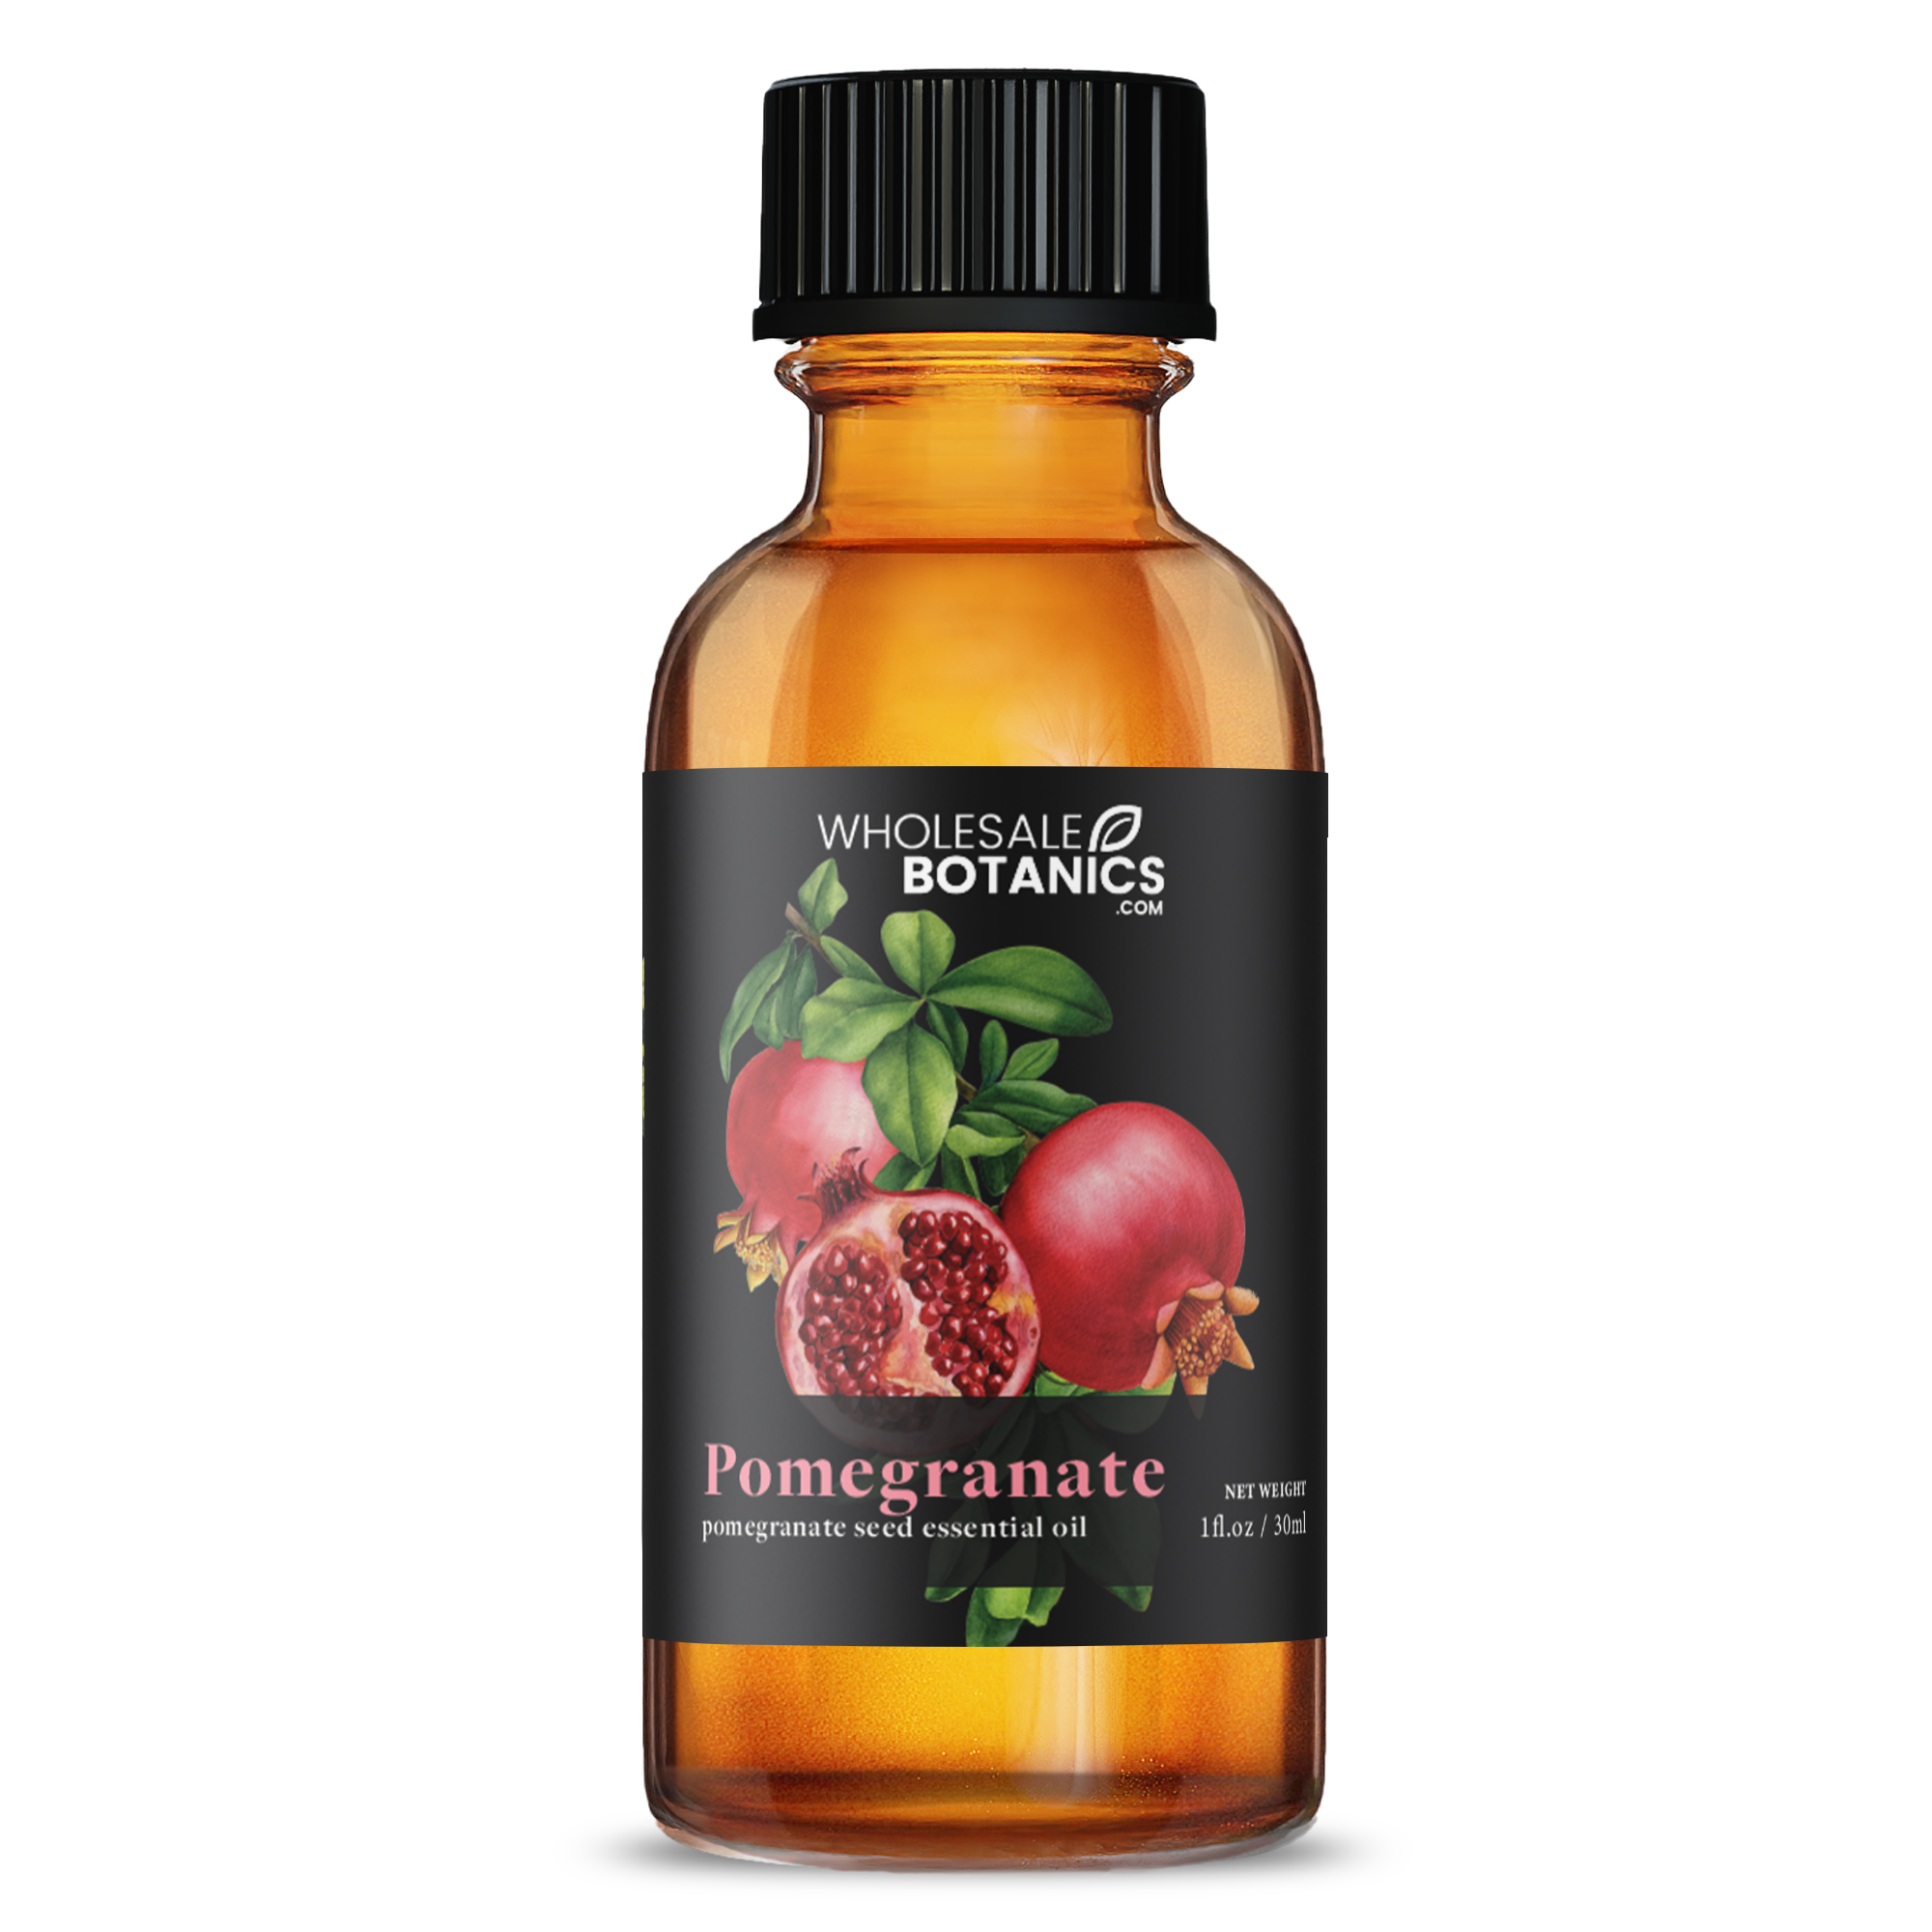 Pomegranate Seed Essential Oil